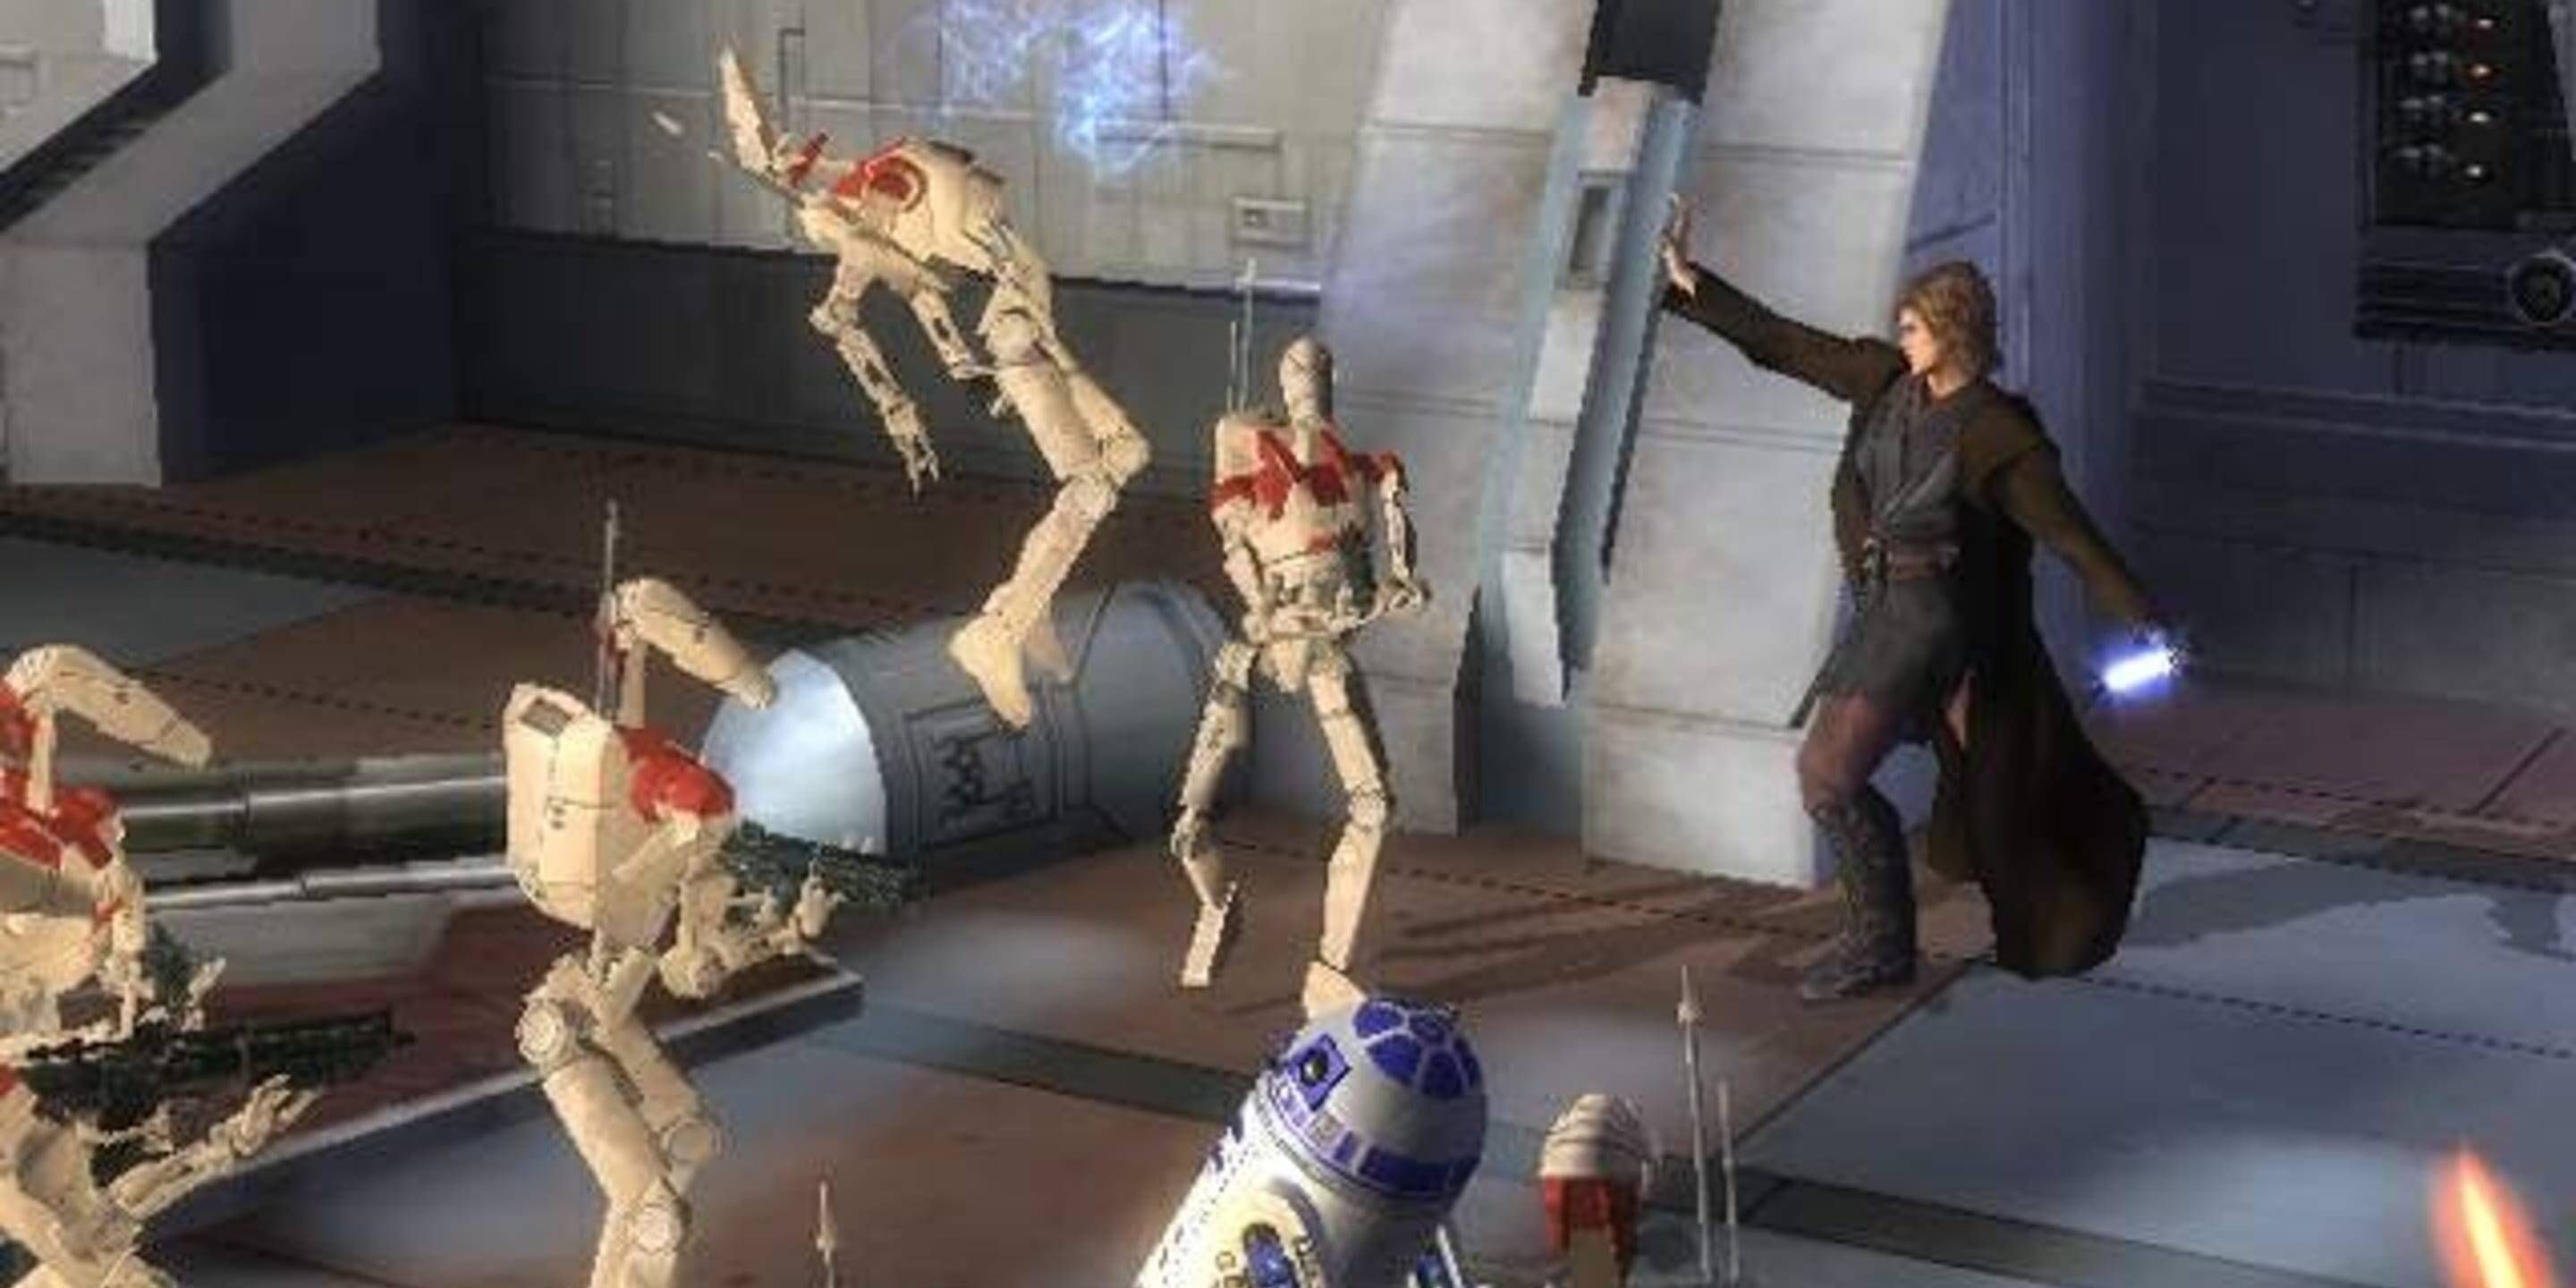 Anakin Skywalker fighting off battle droids with R2-D2 in the Star Wars Episode III Revenge of the Sith video game